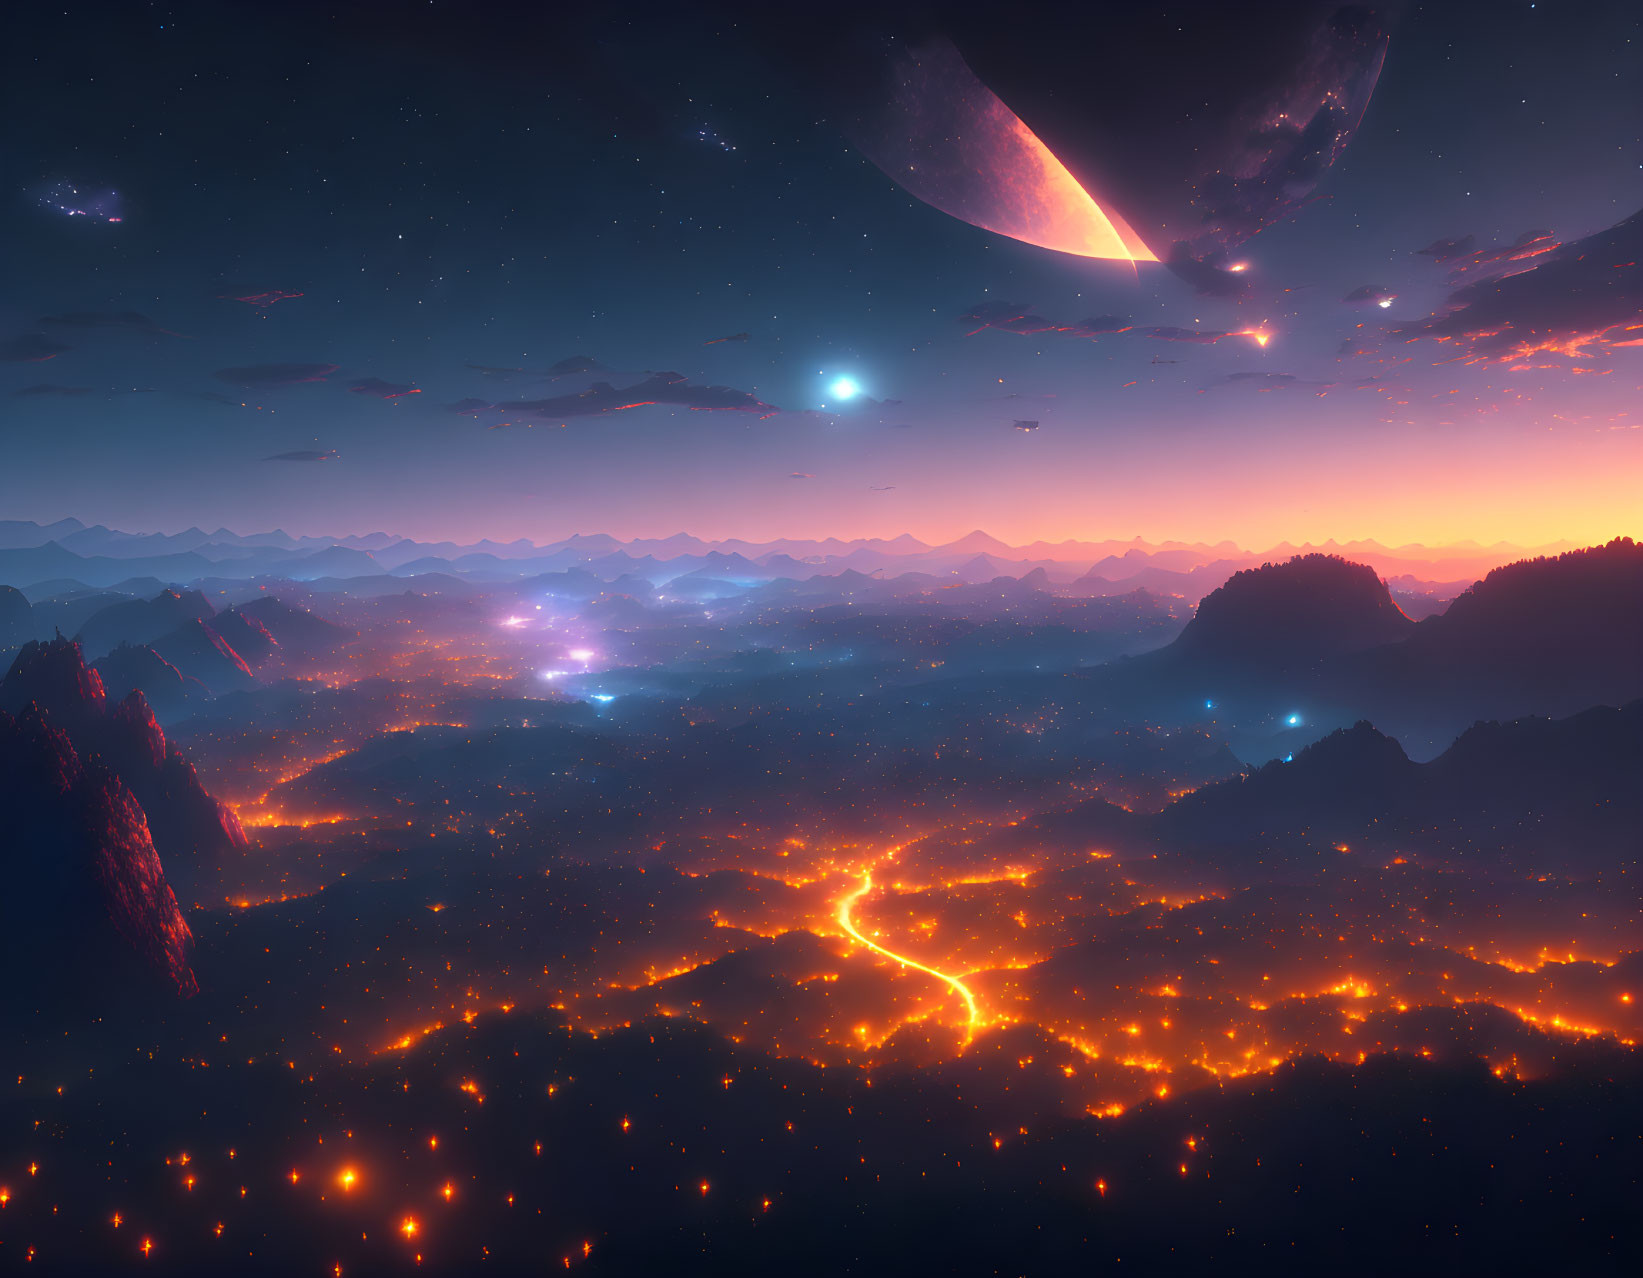 Surreal landscape with illuminated lava flows and dark mountains